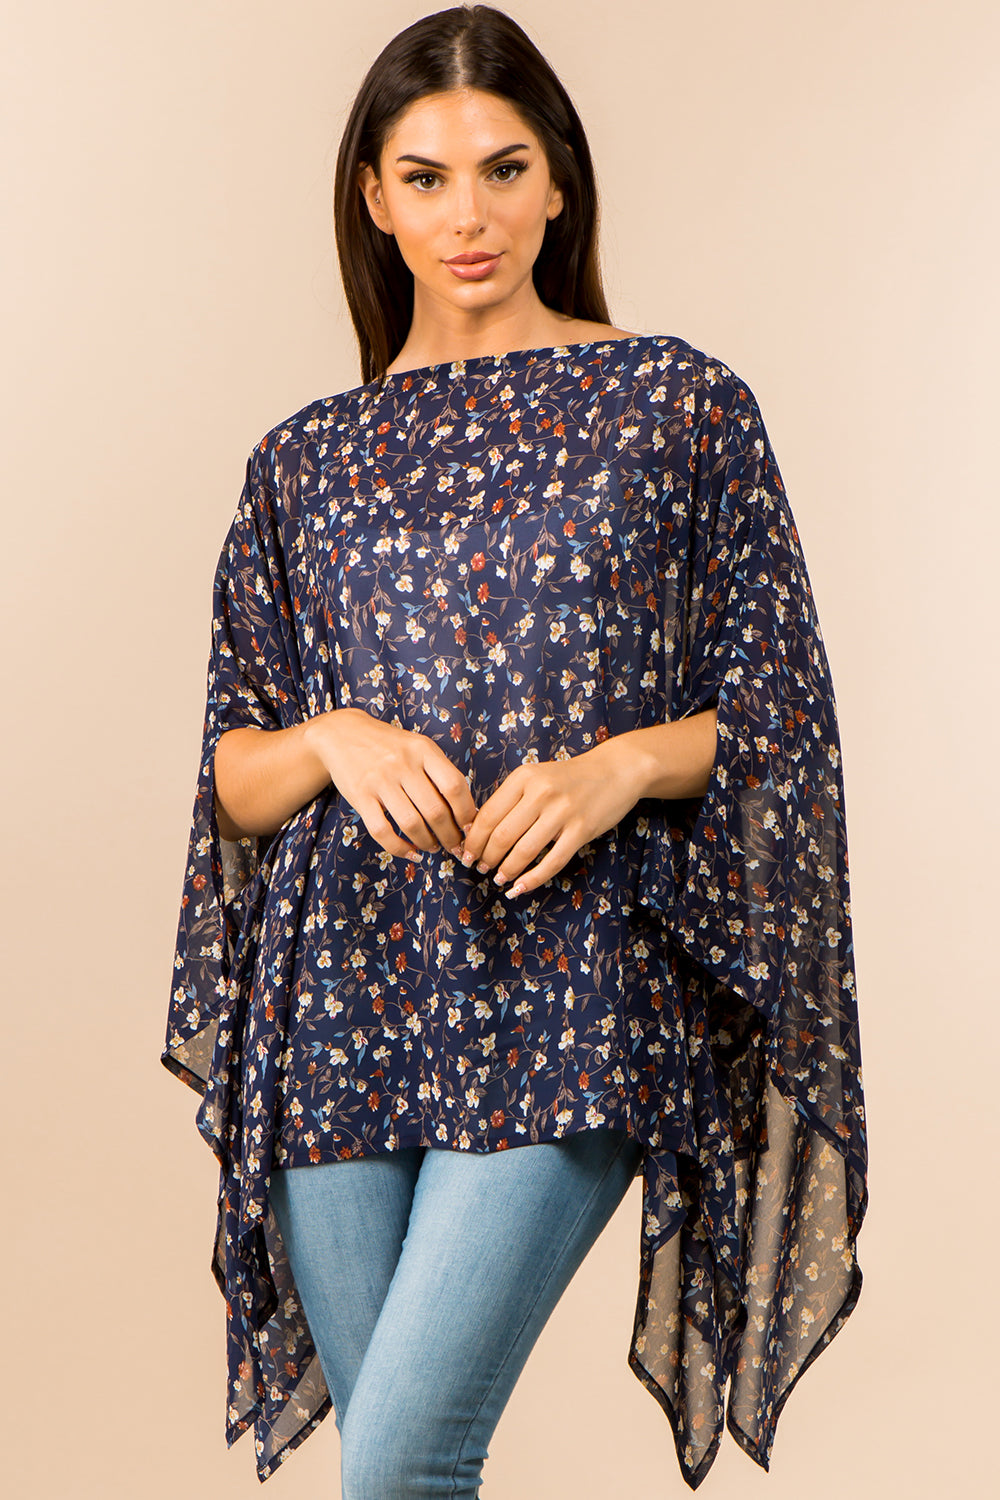 PP-3763 small floral poncho